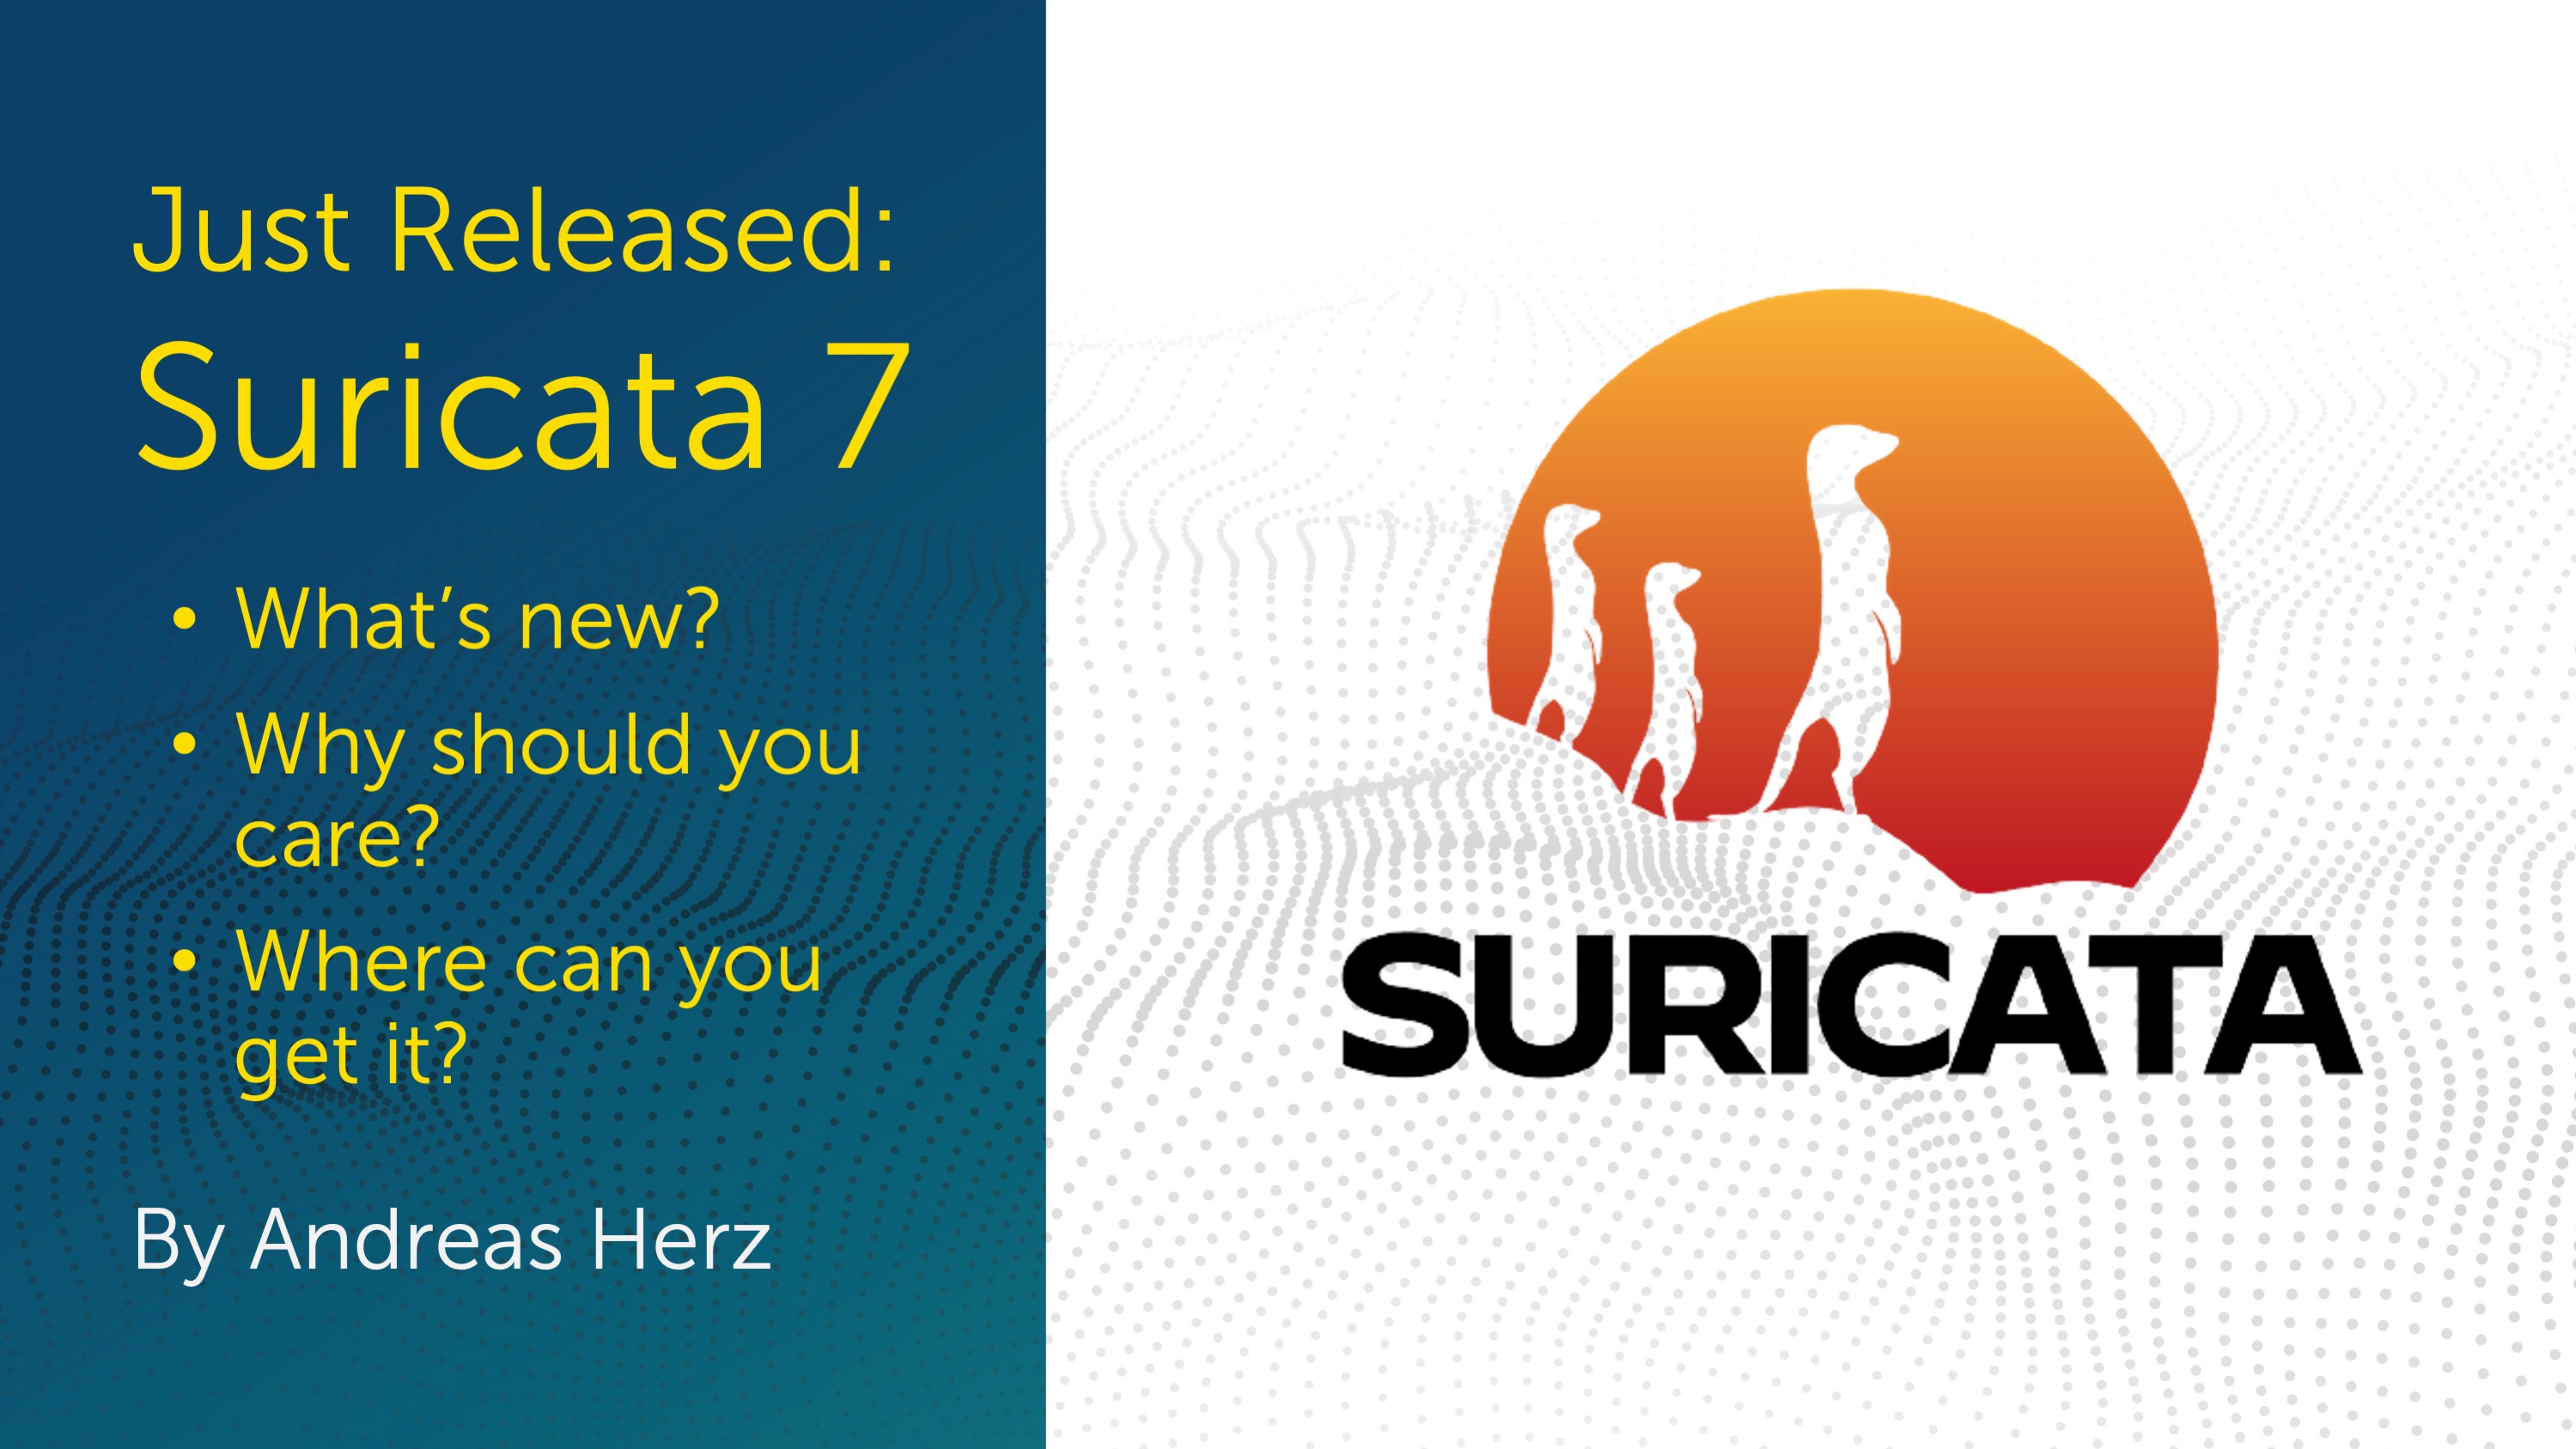 Just Released: Suricata 7 by Andreas Herz